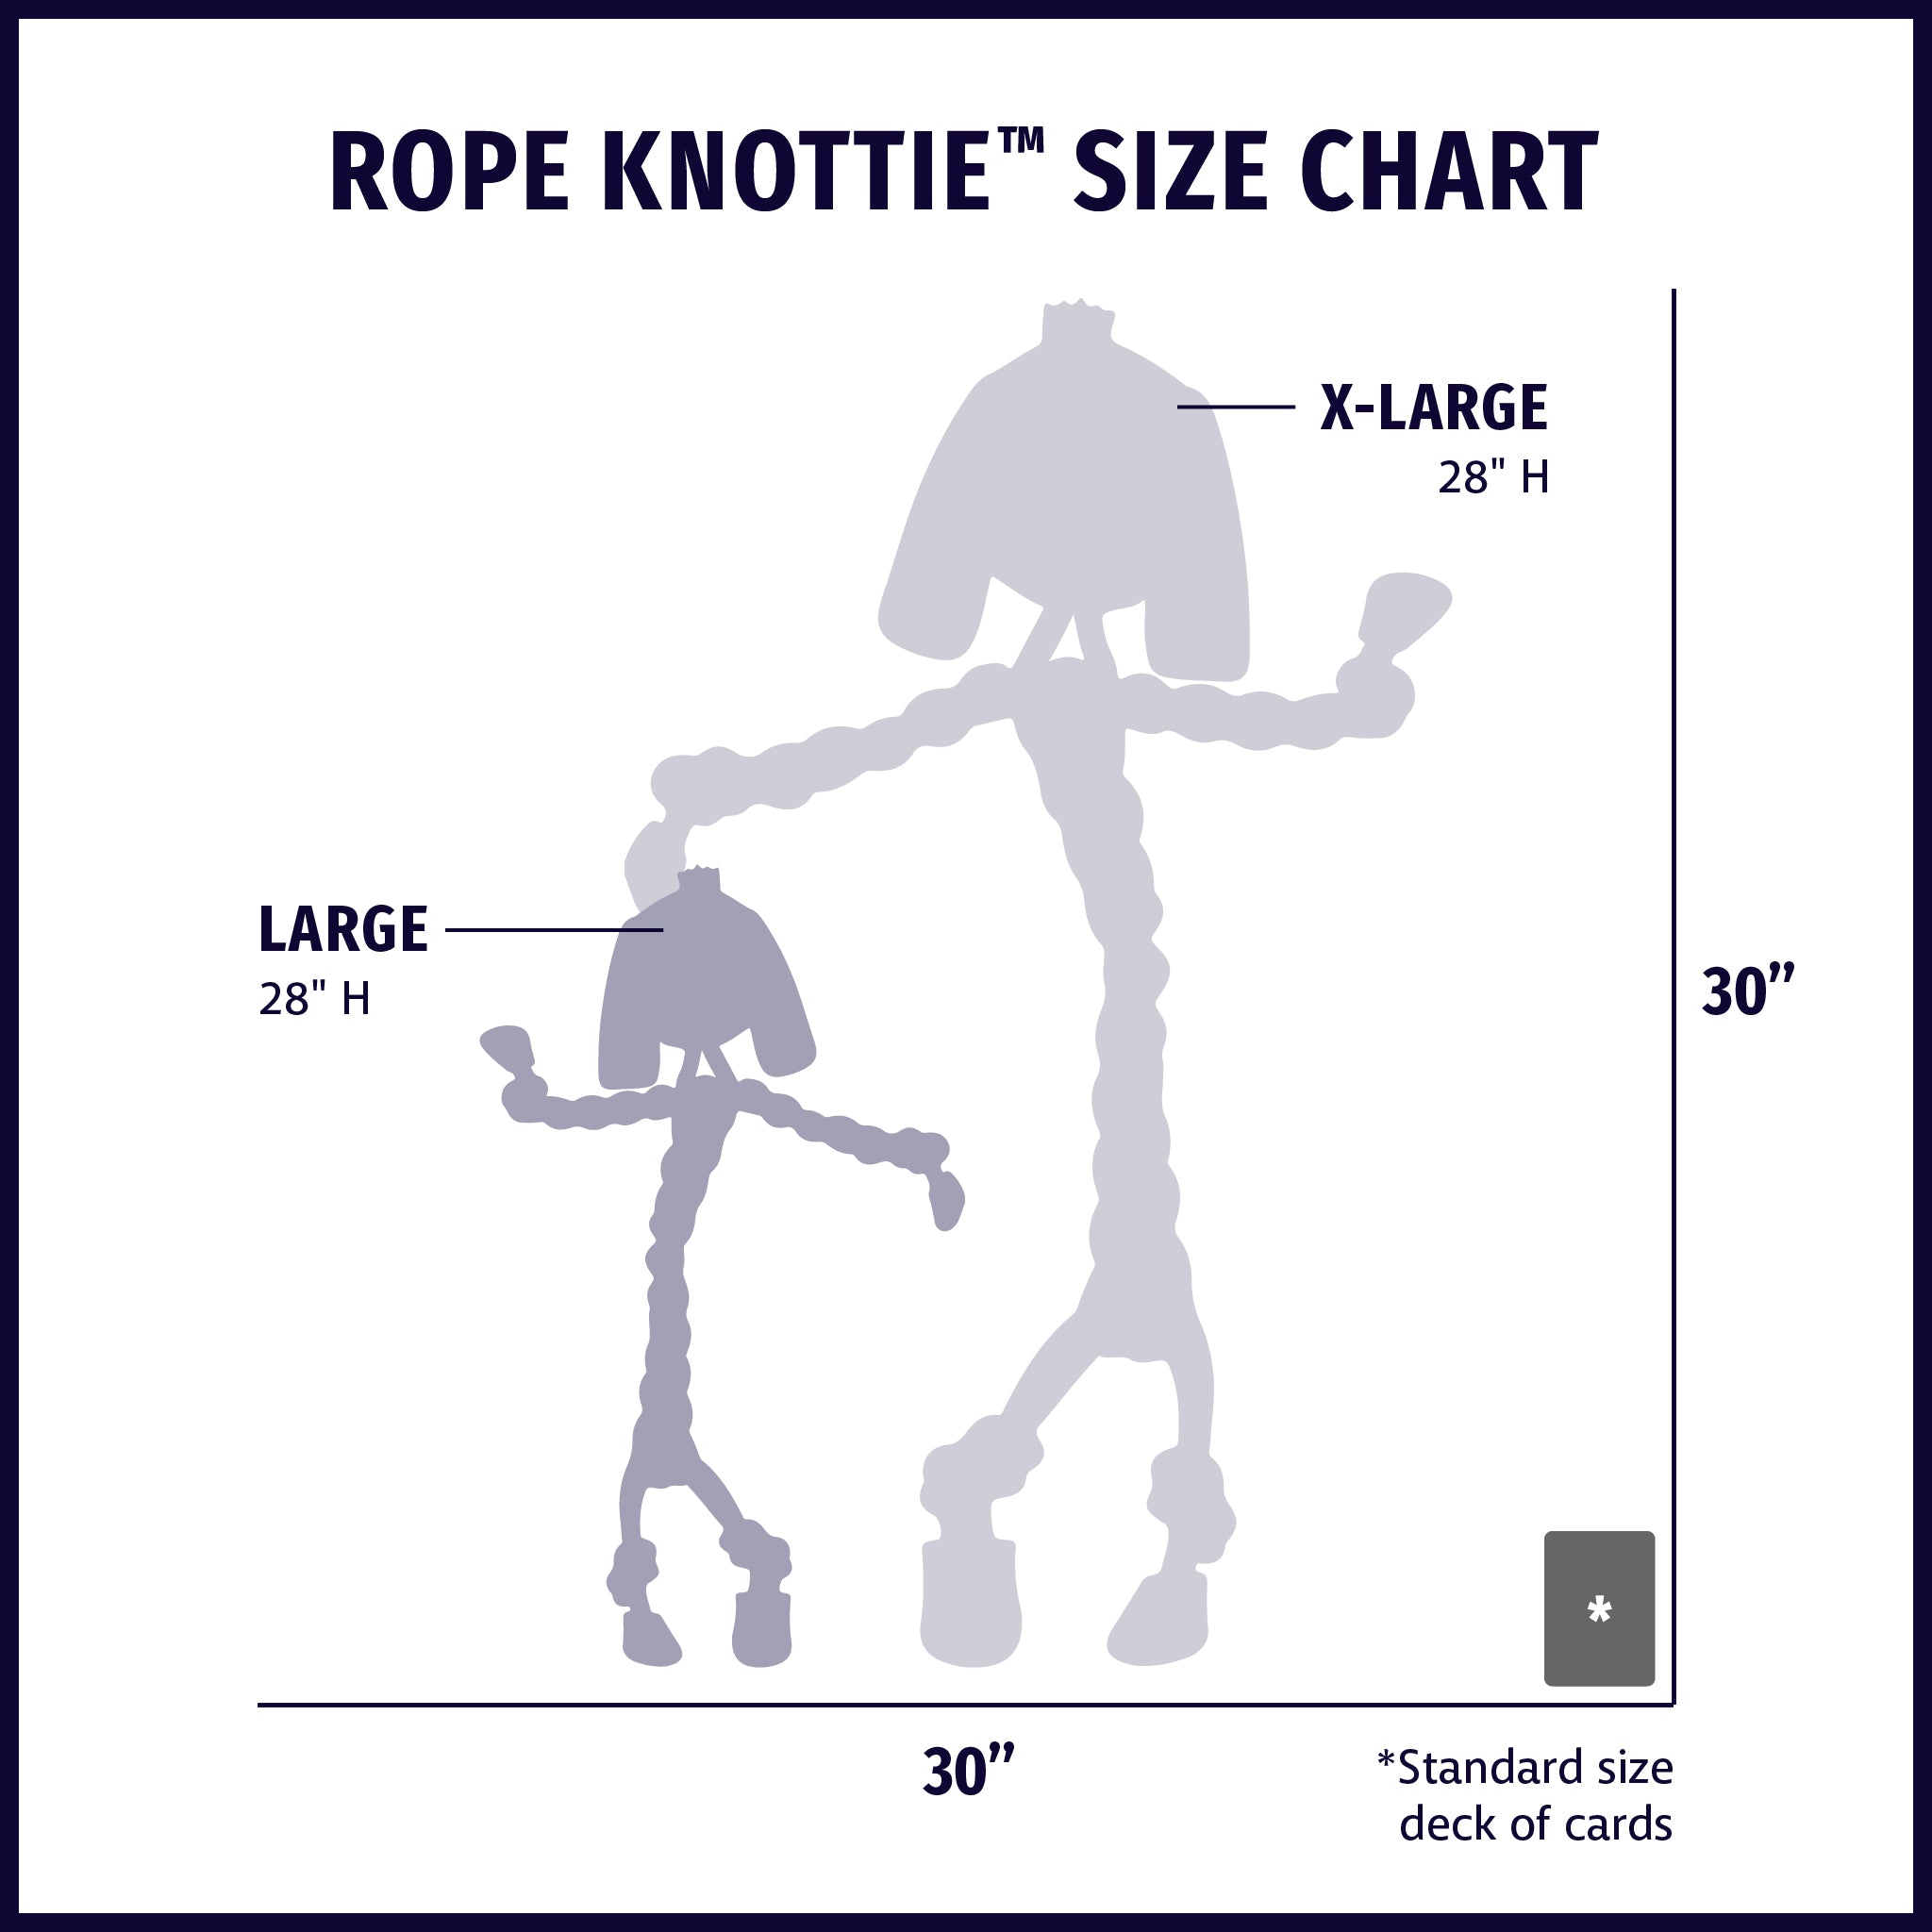 Size chart displaying Natural Rope Knotties® dog toy silhouettes in large and x-large with approximate dimensions of each size compared to standard size deck of cards.